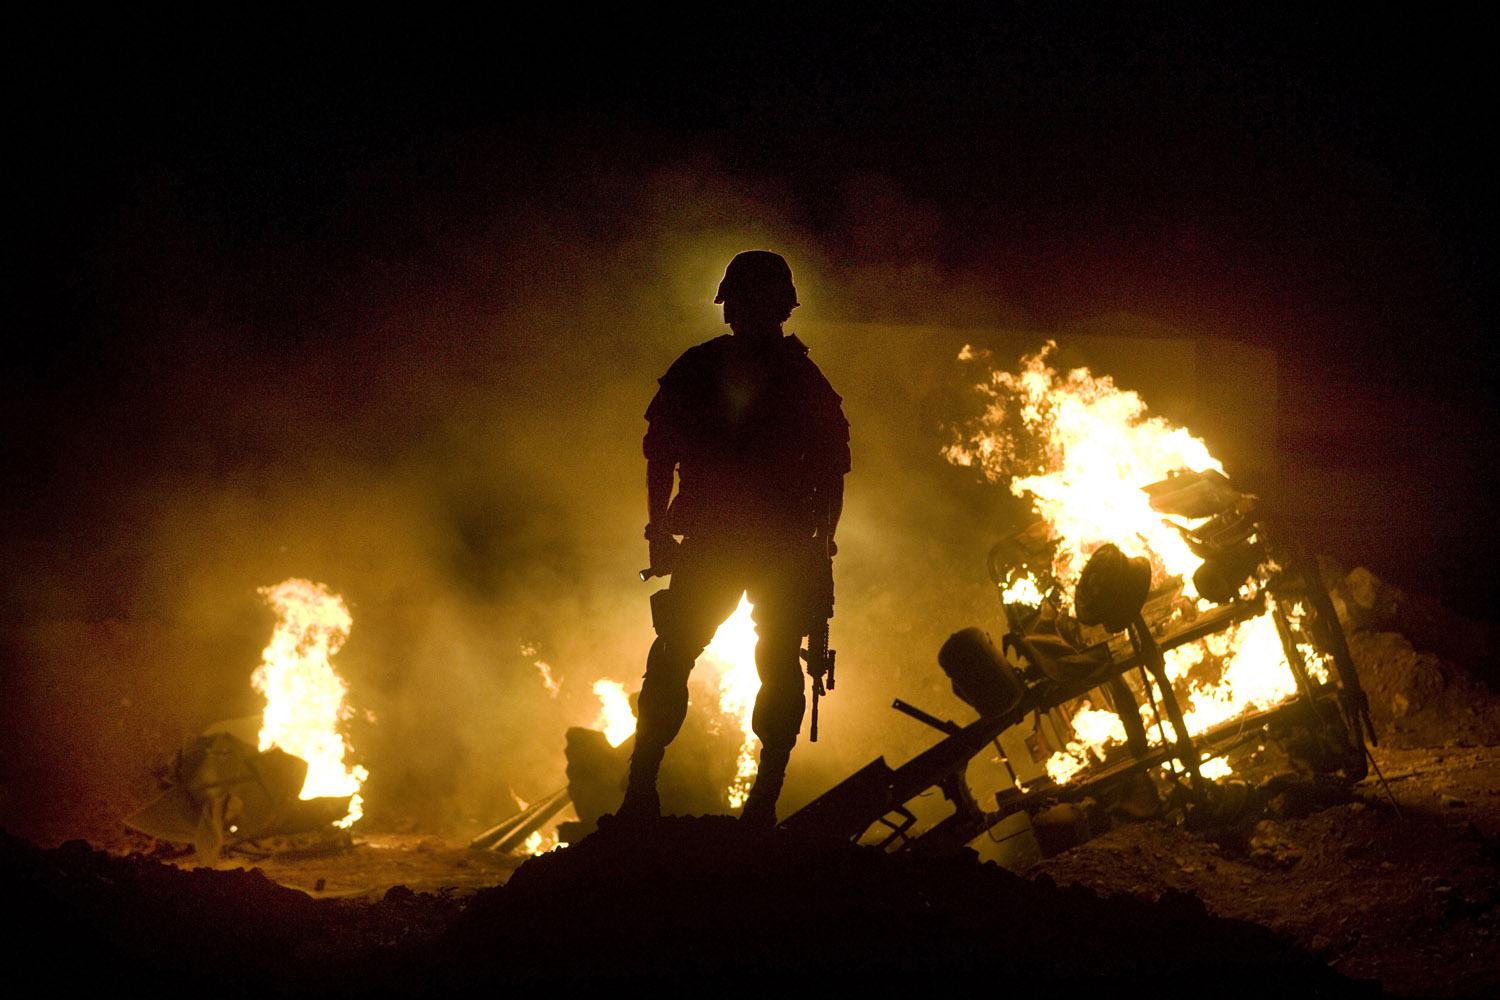 Jeremy Renner in a production still from the film 'The Hurt Locker' directed by Katherine Bigelow, Director of photography, Barry Ackroyd. Jordan.